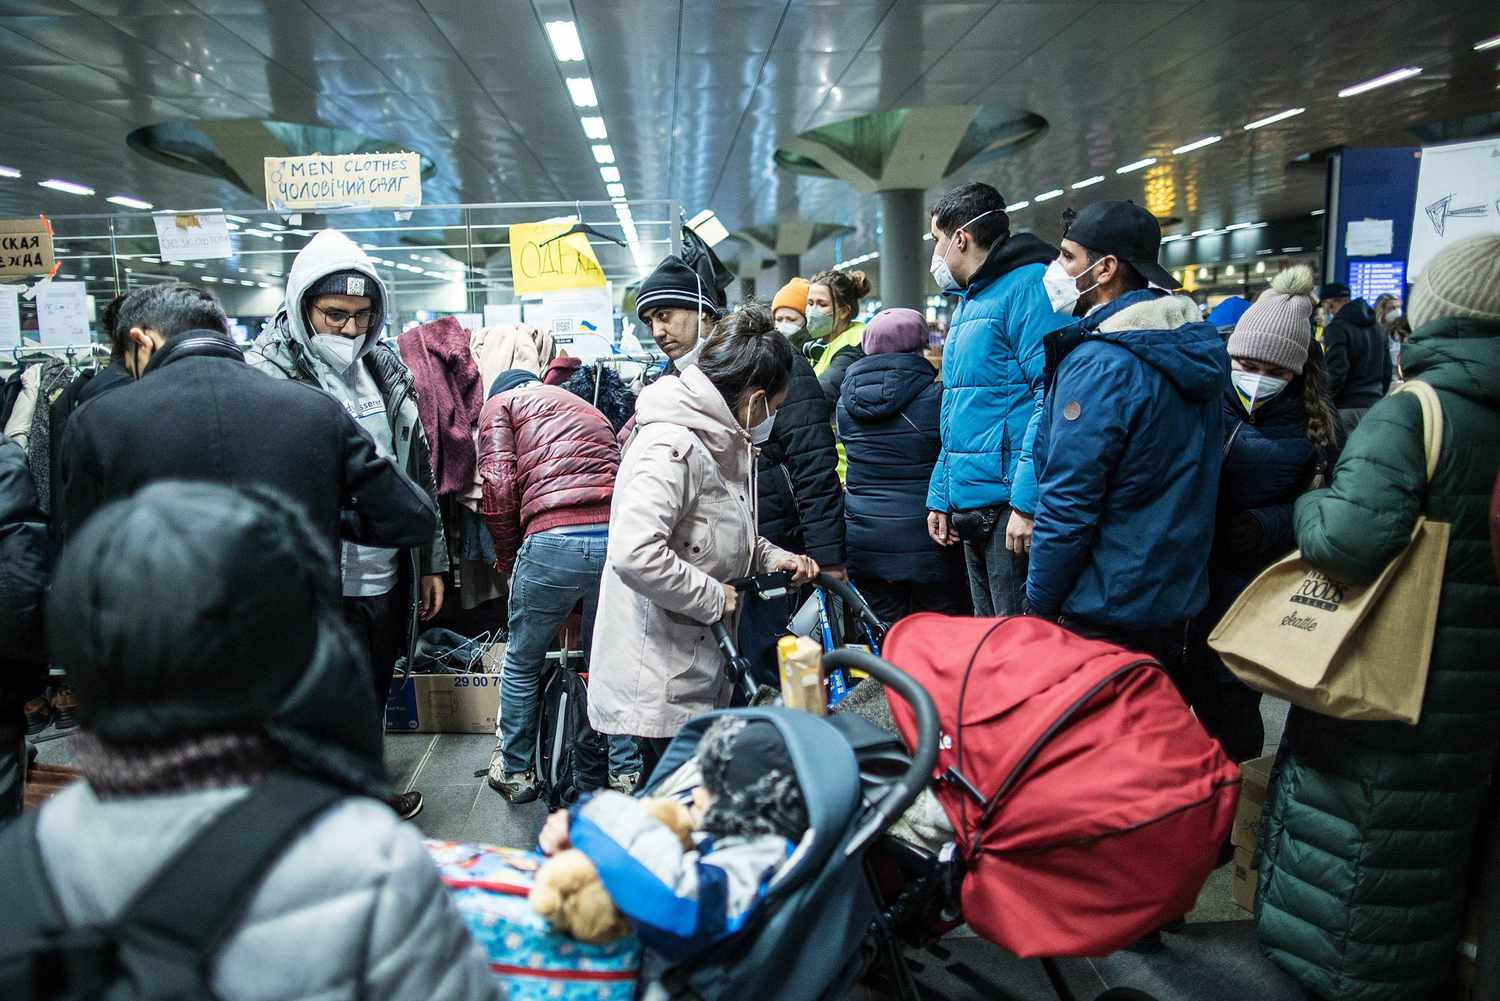 Crowded train station of refugees